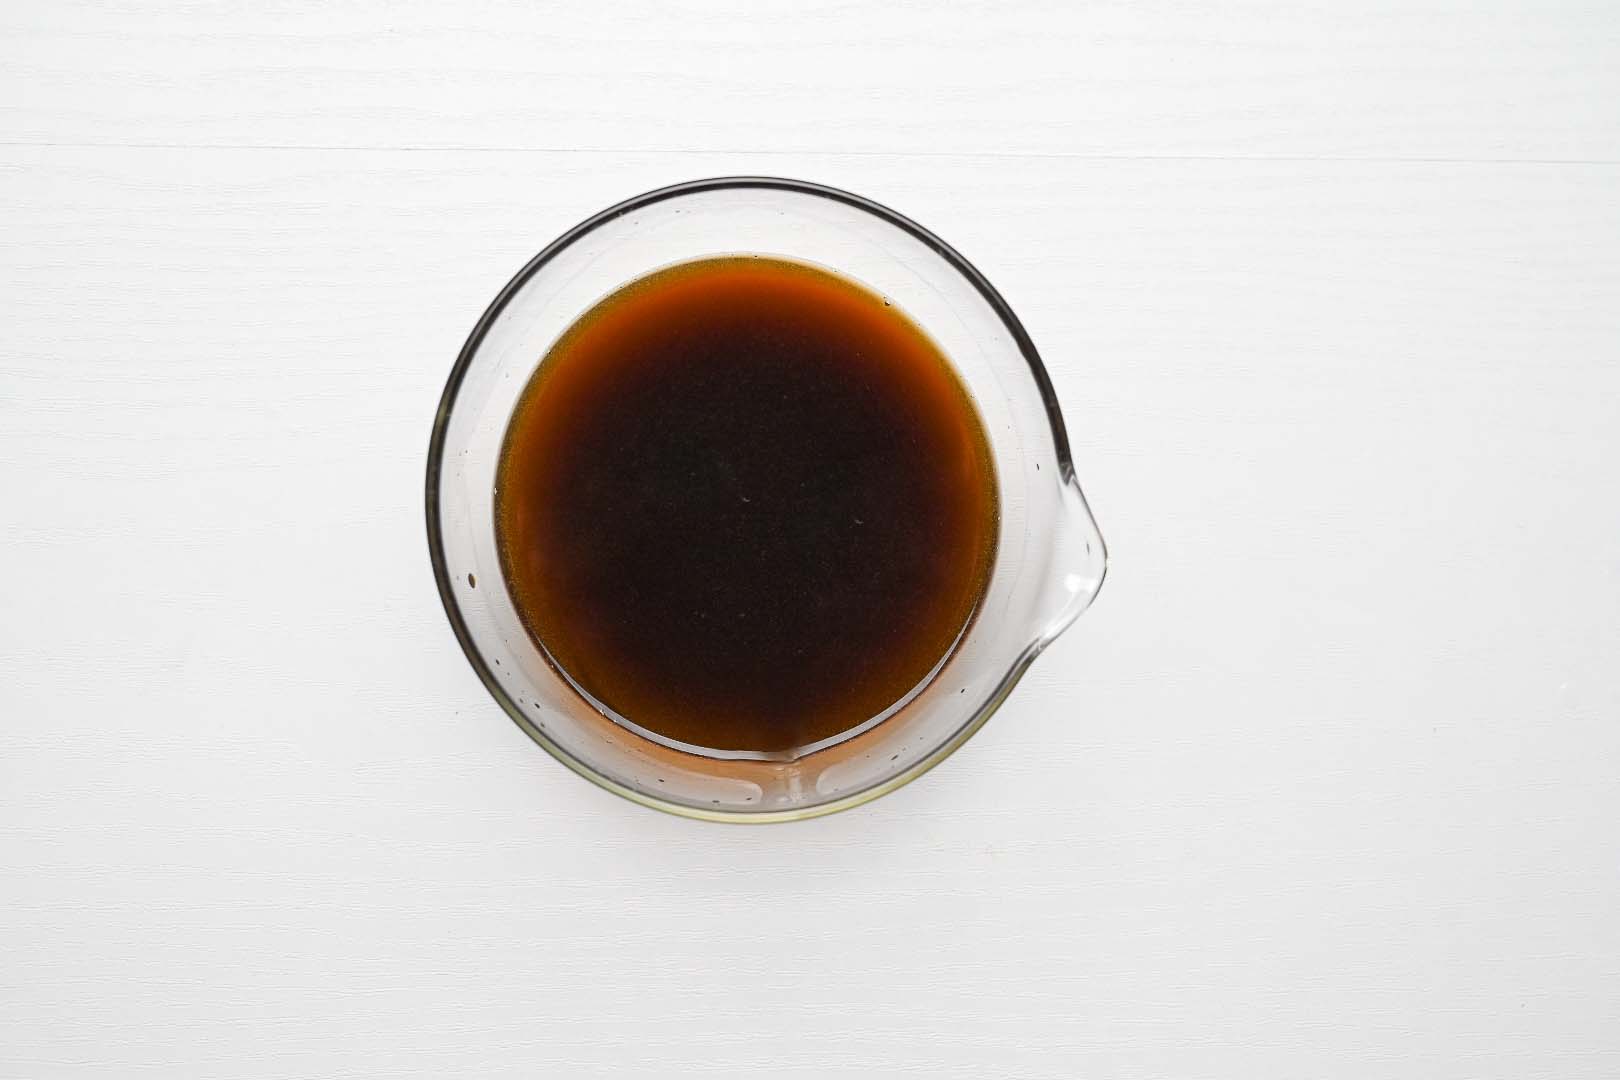 mixing teriyaki style sauce in a small glass bowl